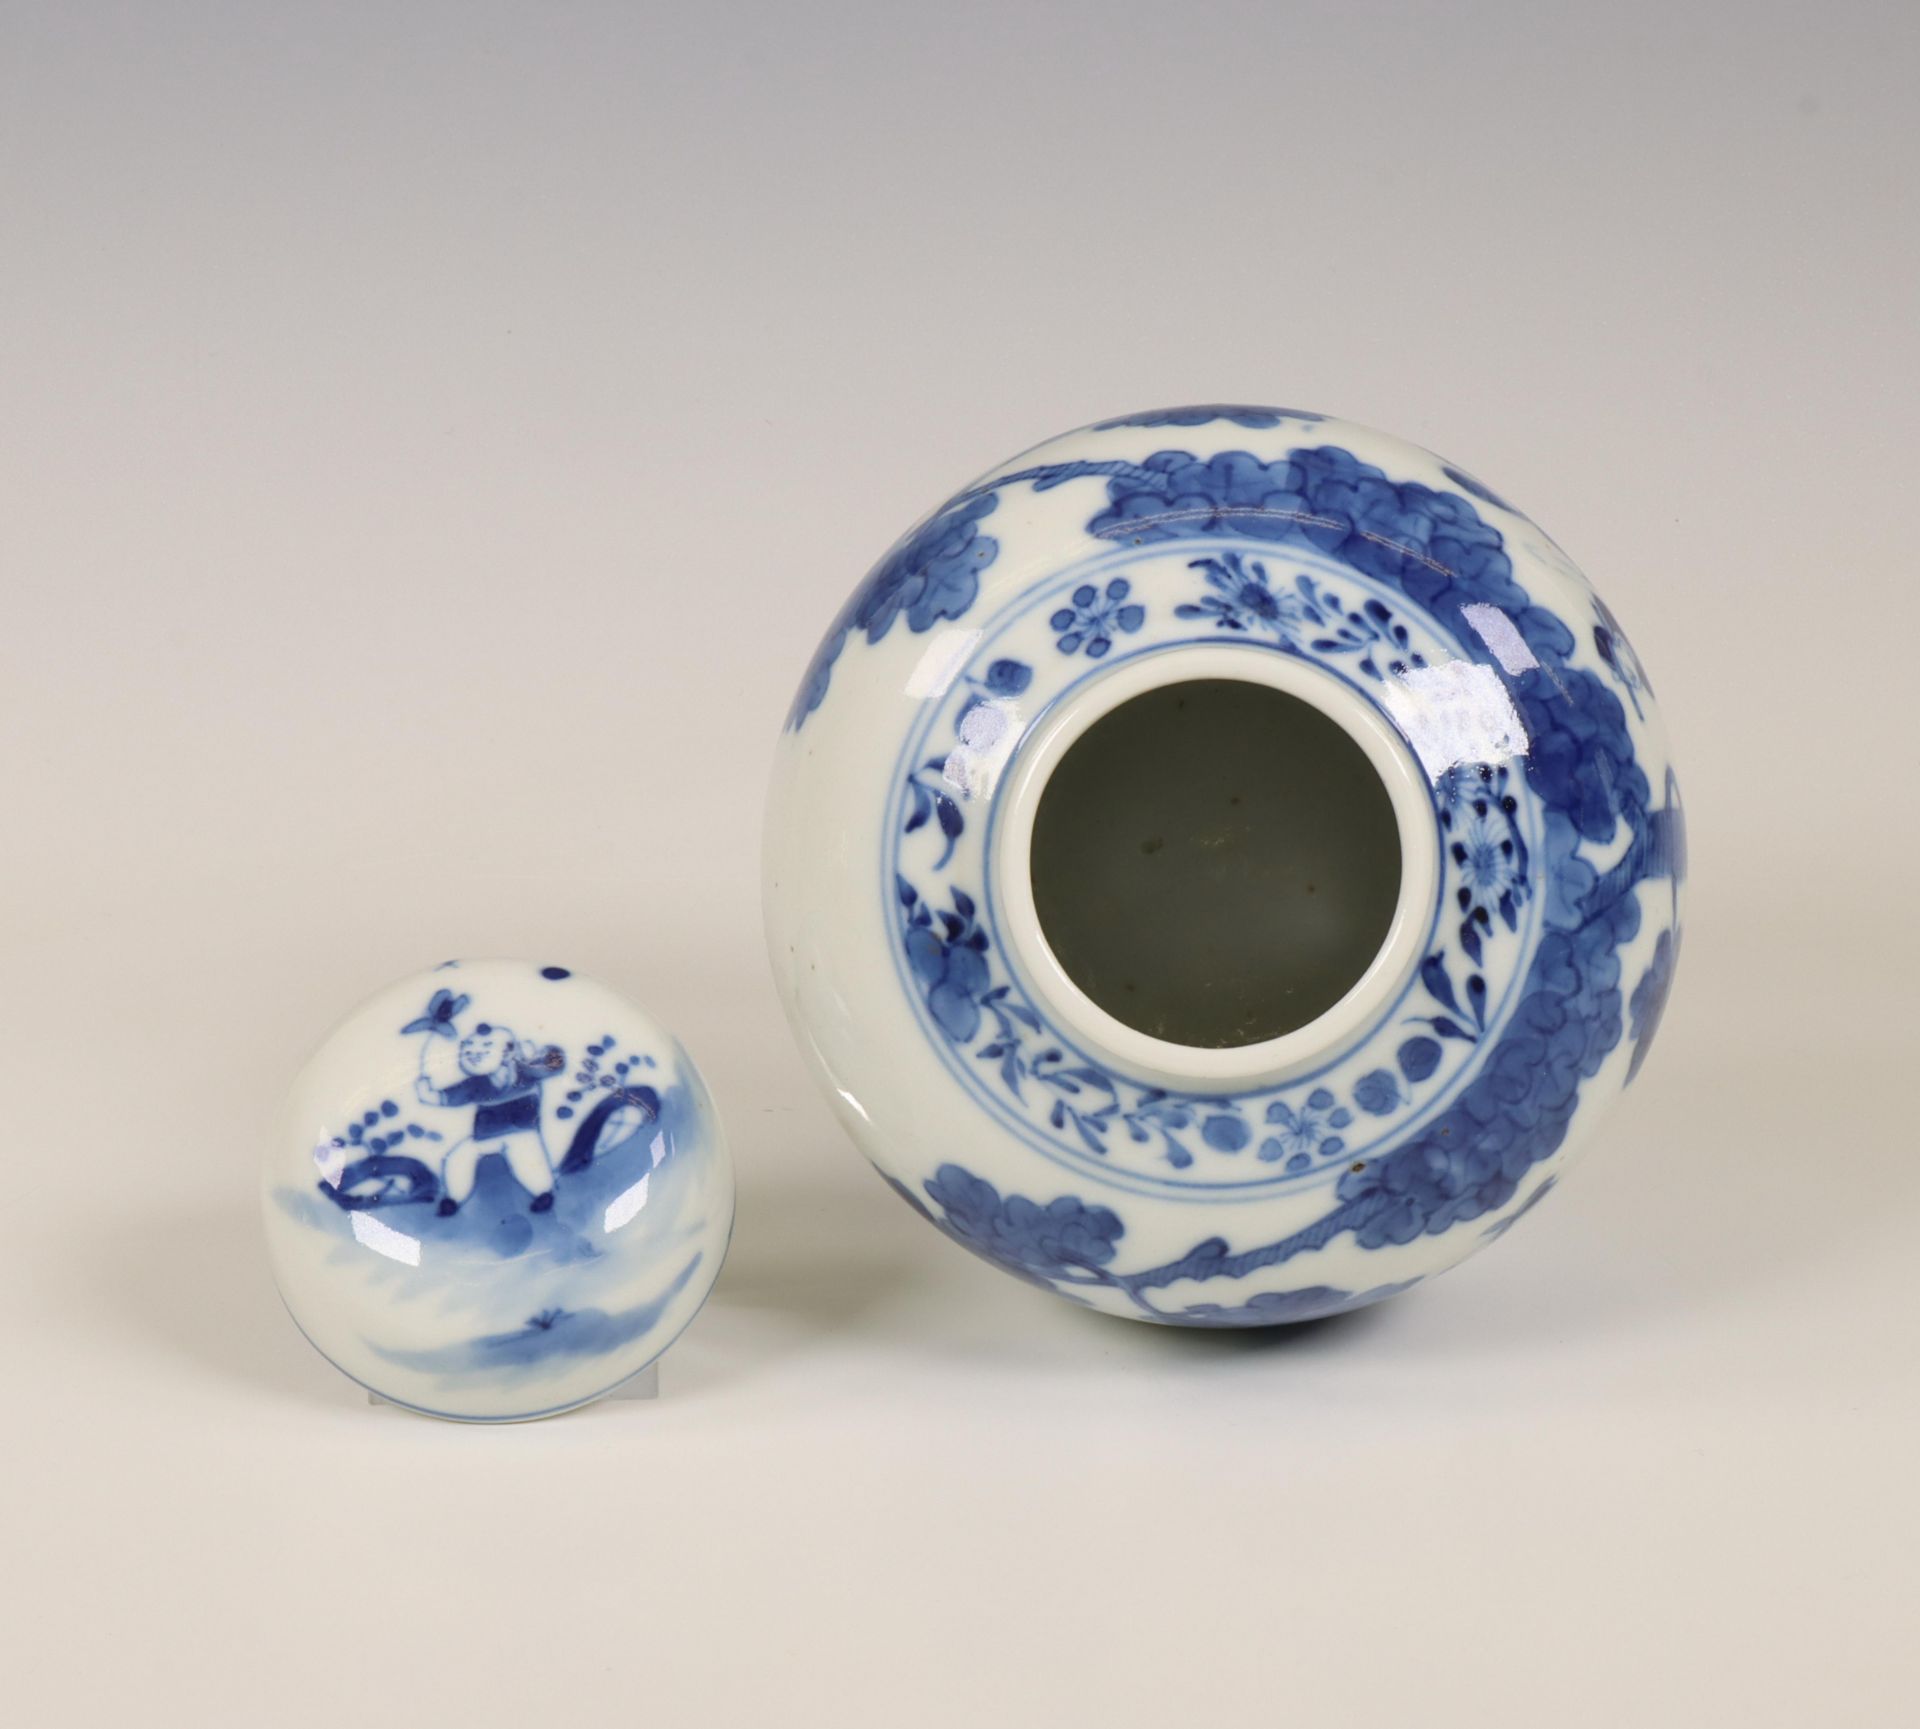 China, blue and white porcelain ginger jar and cover, 18th century, - Bild 3 aus 5